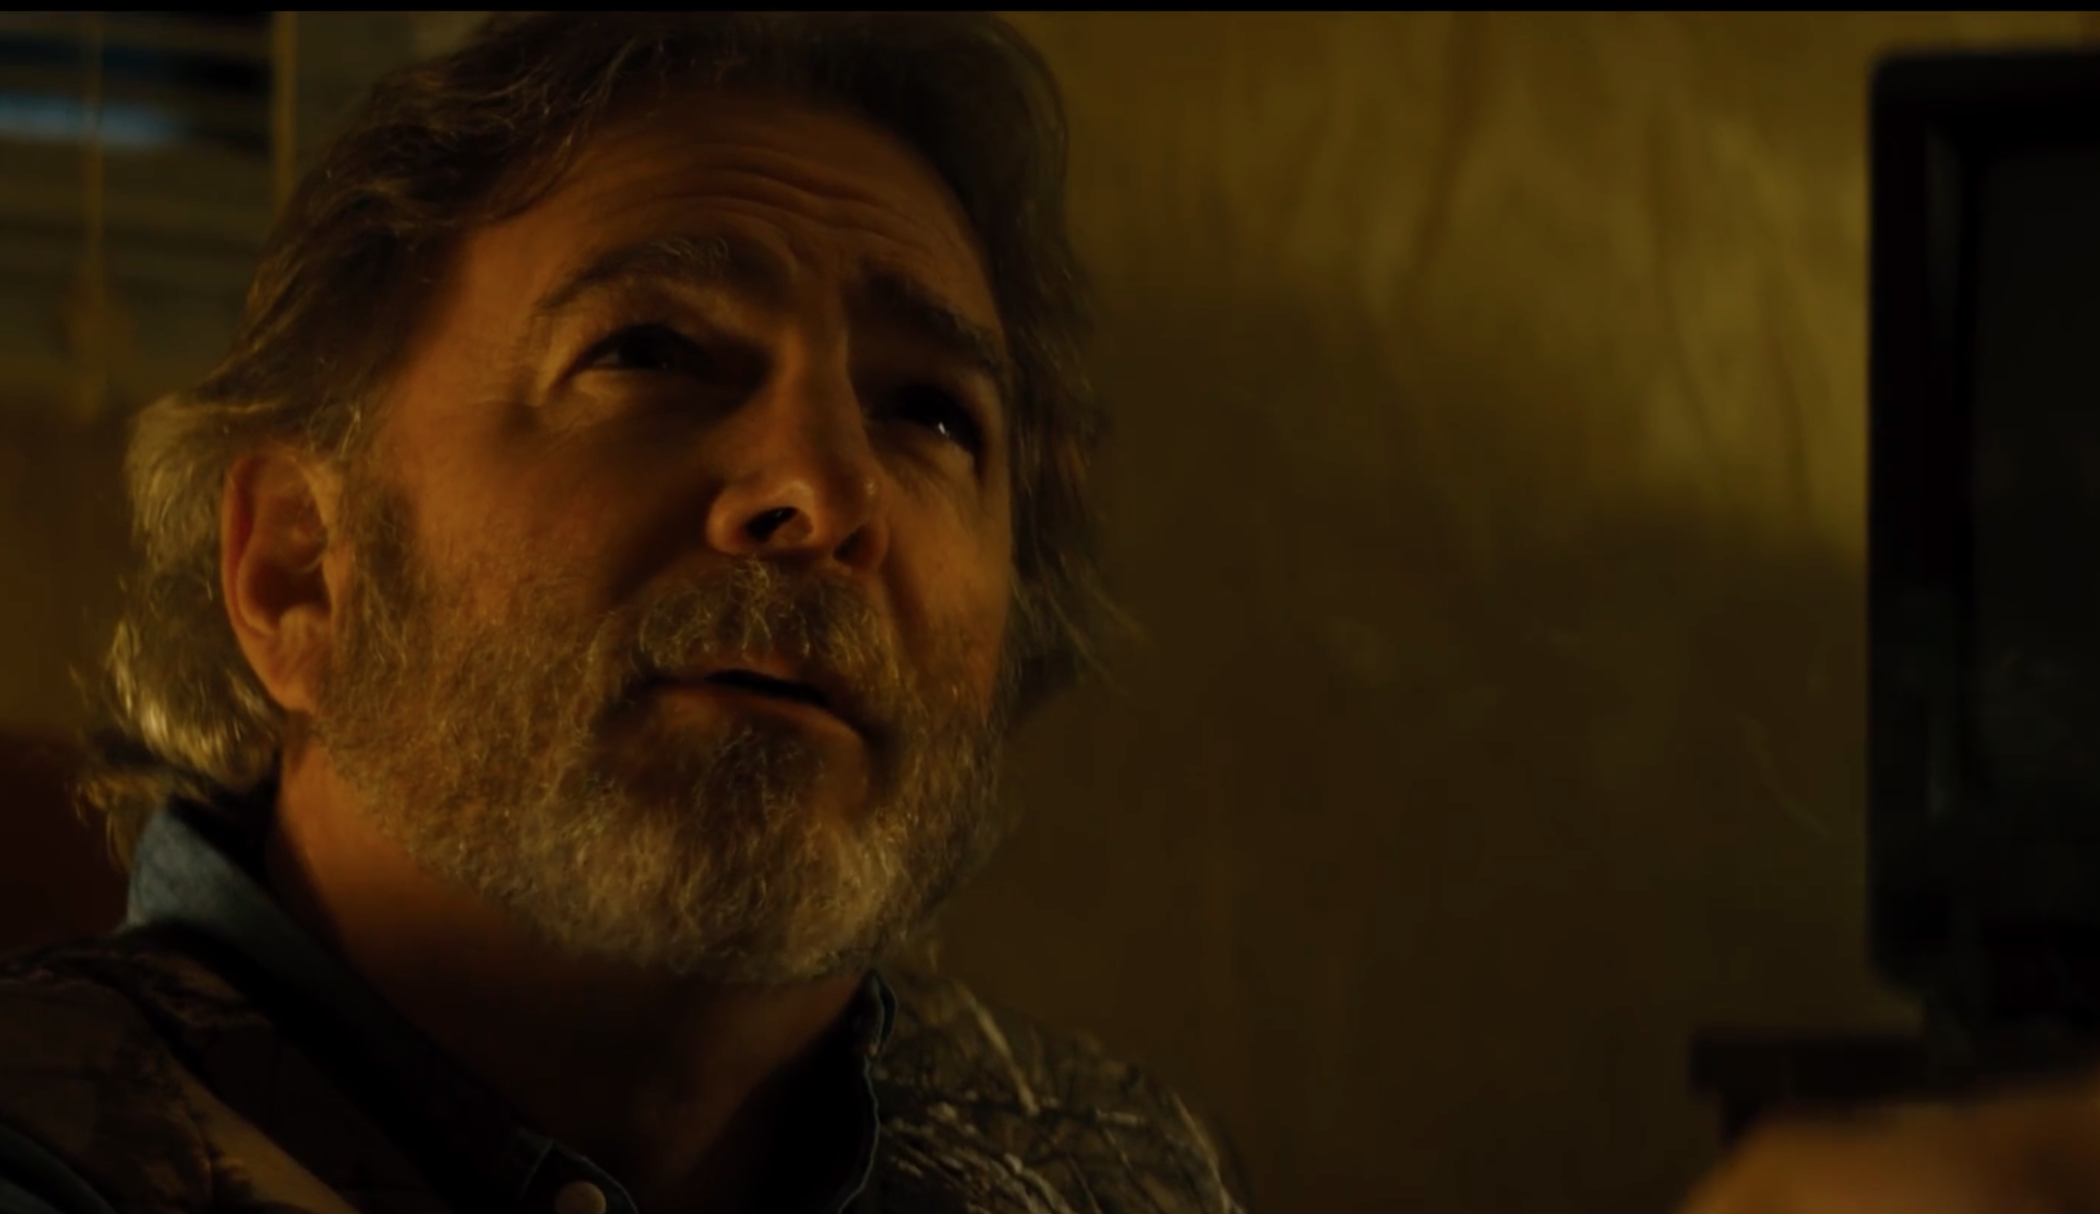 How to watch Bill Engvall in his new horror movie, The Neighbor